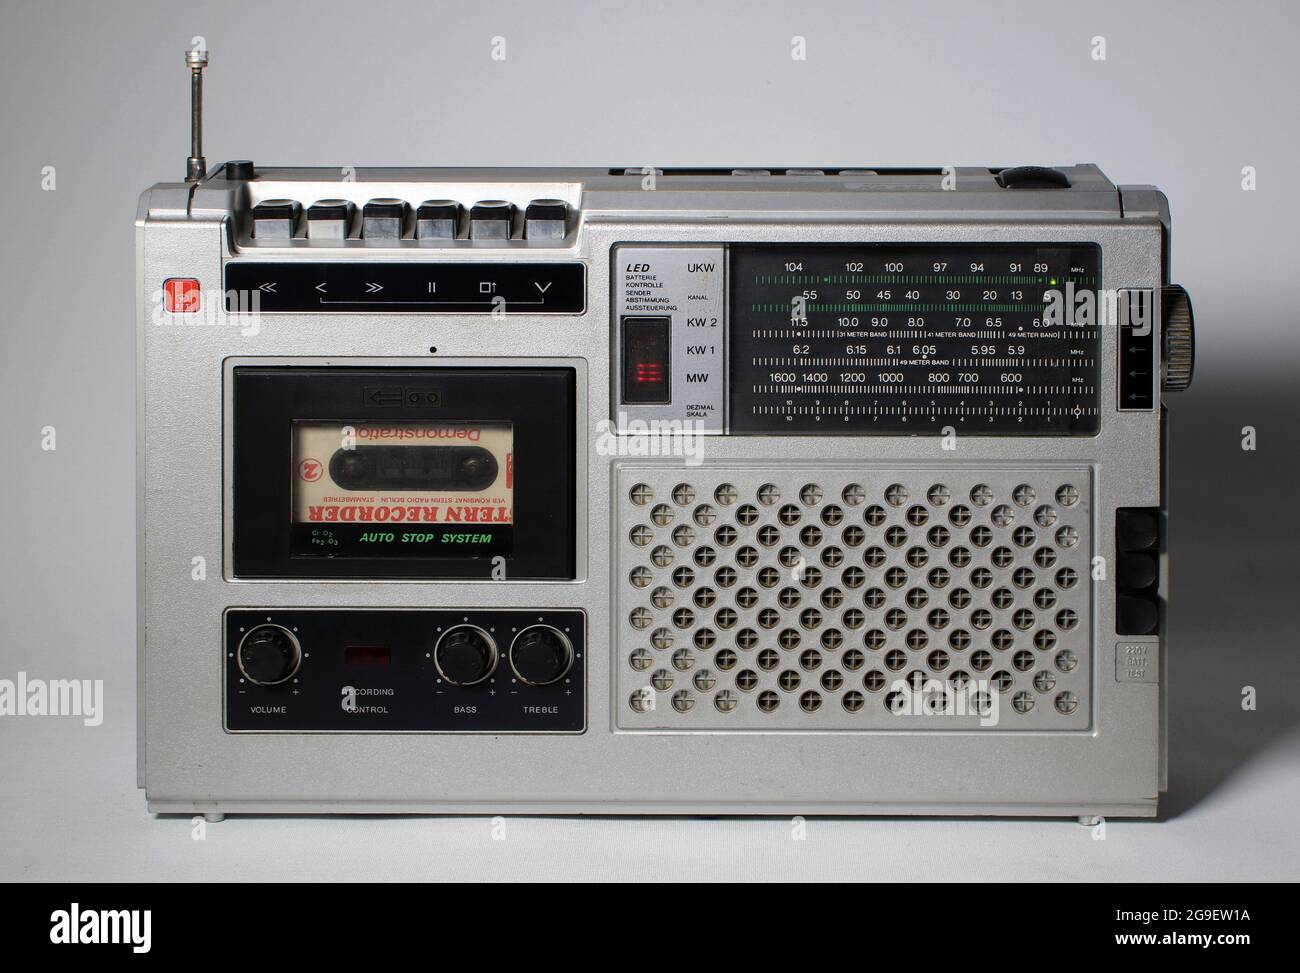 broadcast, radio, mono cassette recorder radio set Steracord KR 450, design by factory, ADDITIONAL-RIGHTS-CLEARANCE-INFO-NOT-AVAILABLE Stock Photo